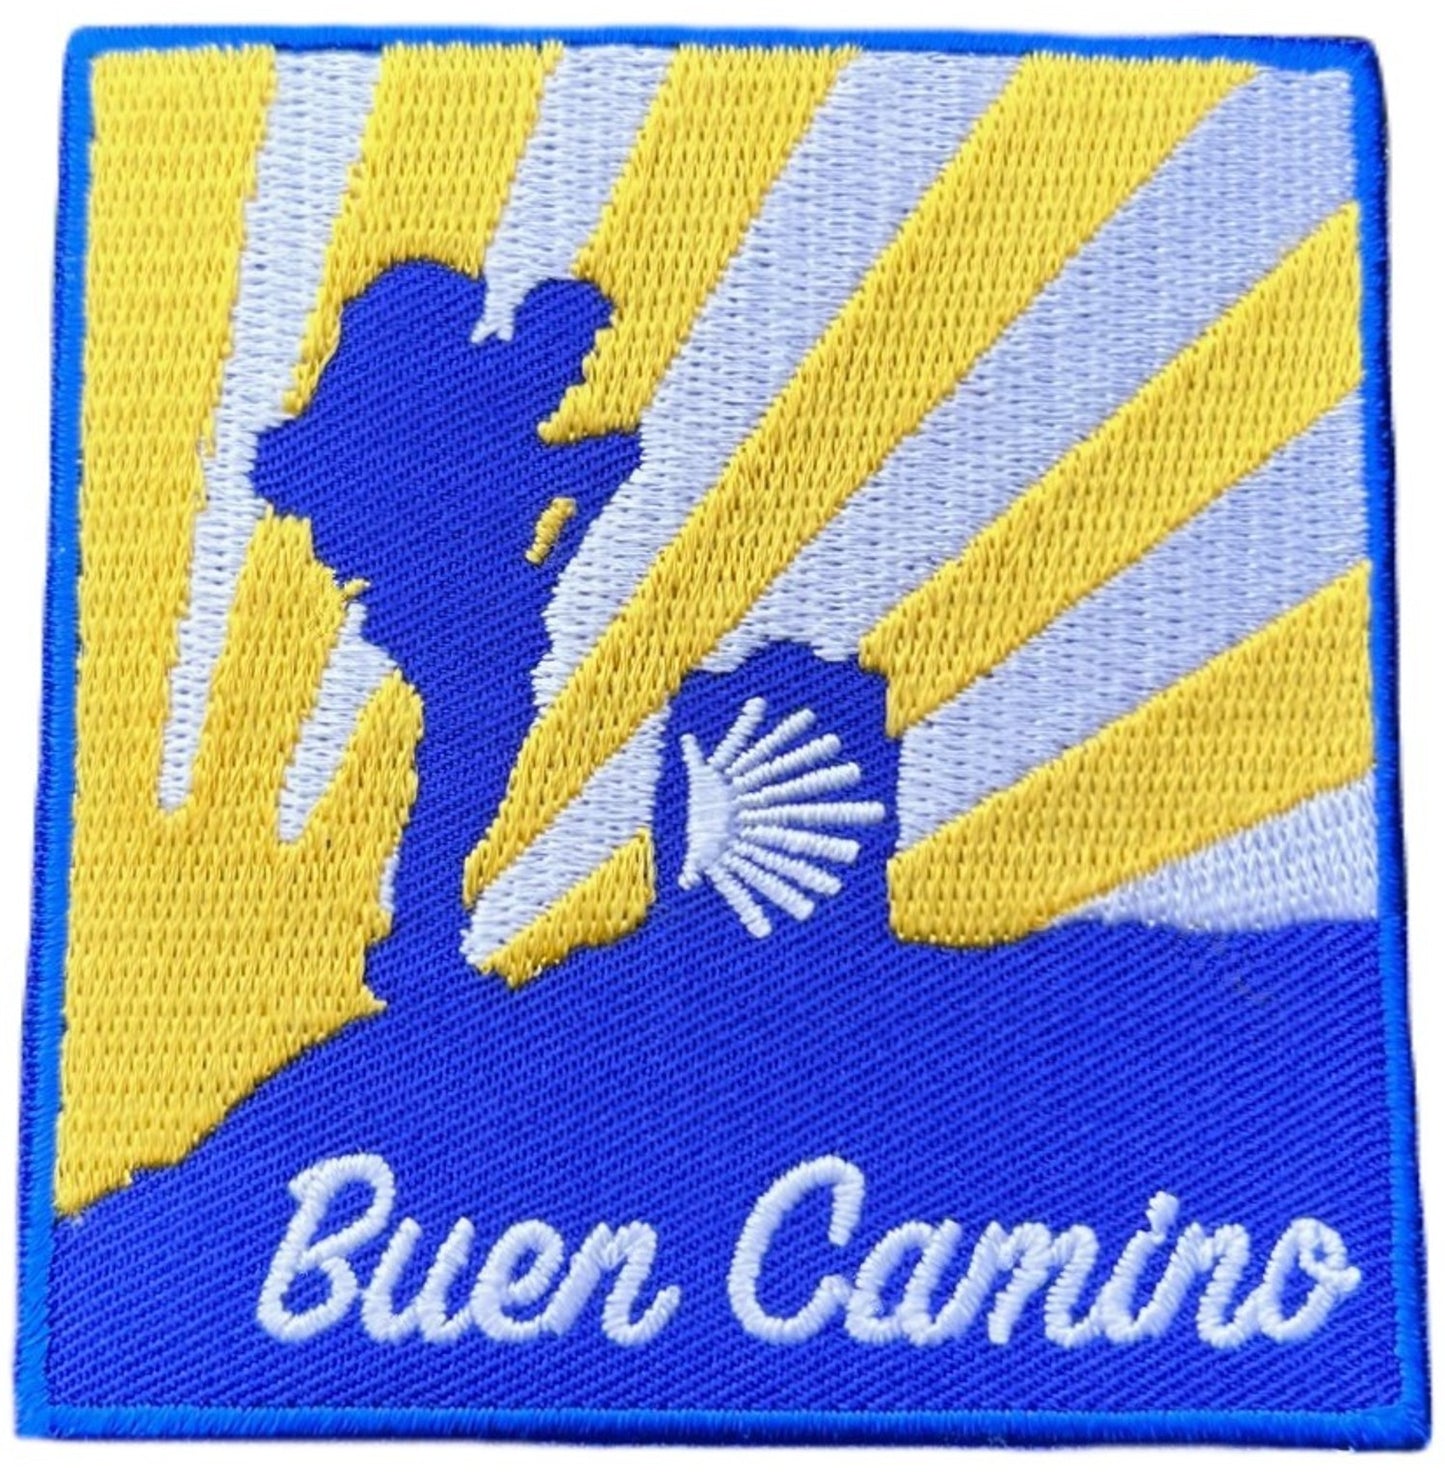 Buen Camino Patch (3 Inch) Embroidered Iron-on / Sew-on Badge Saint James Way Camino De Santiago Emblem Scallop Crest Souvenir Gift Patches